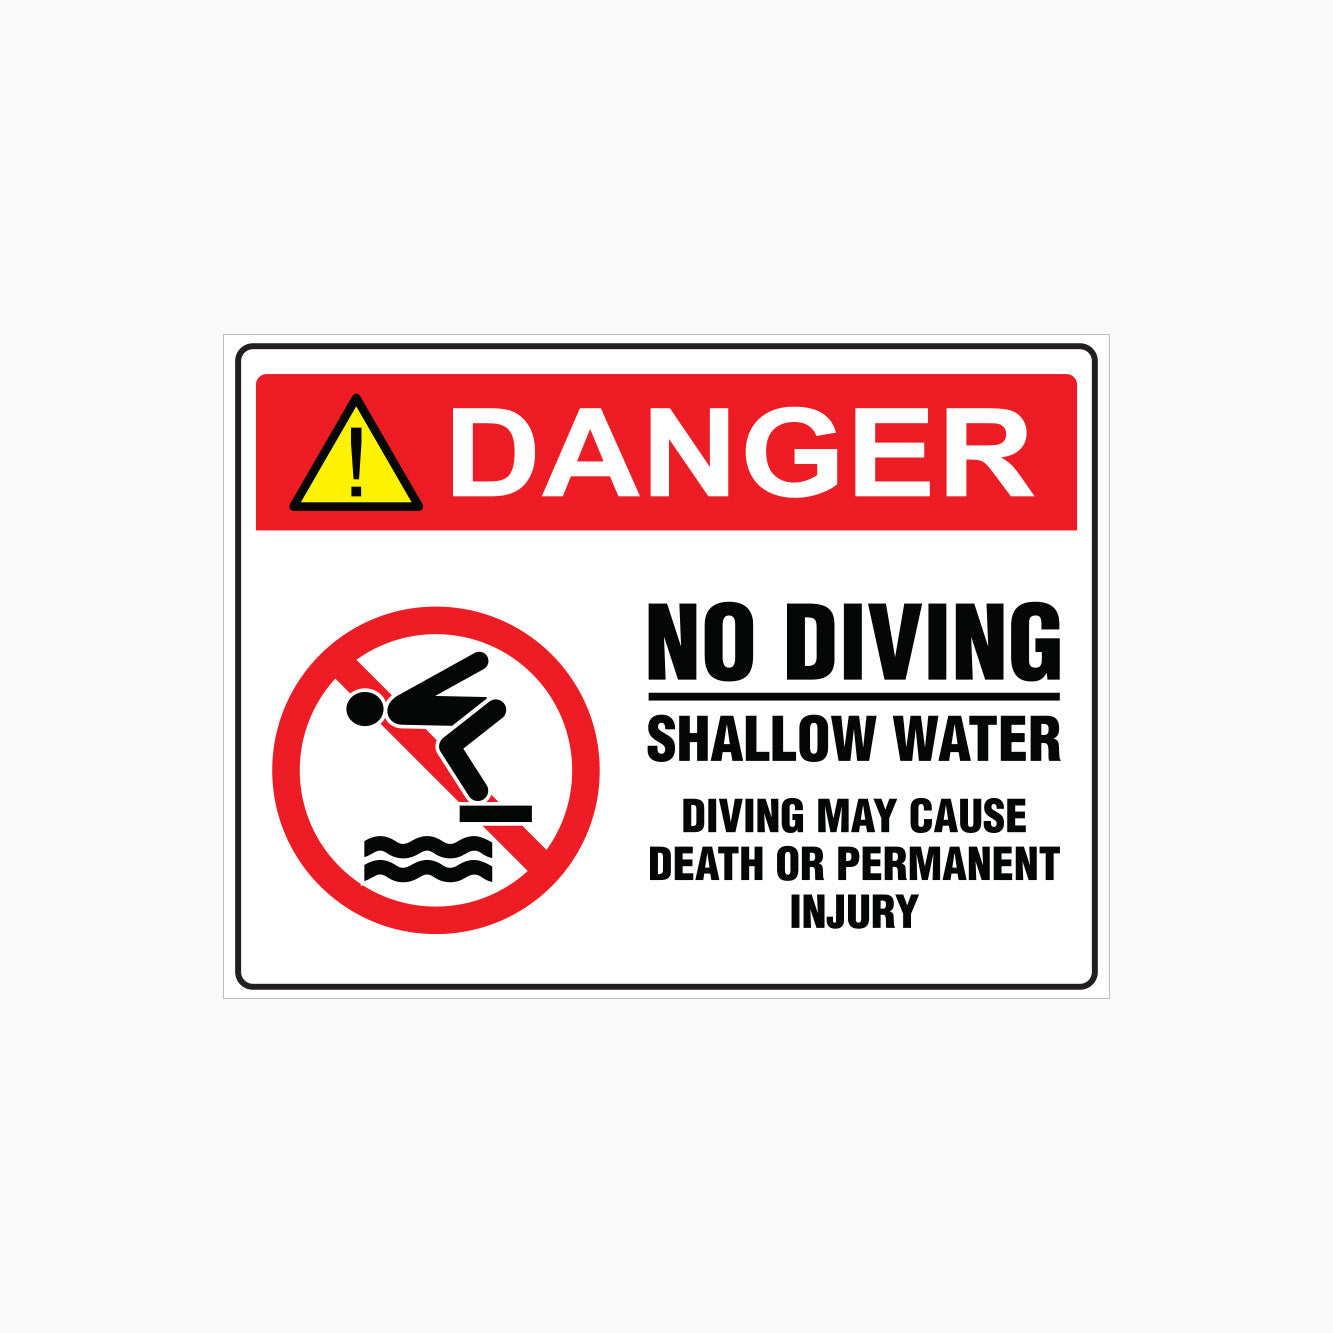 DANGER SIGN - NO DIVING - SHALLOW WATER - DIVING MAY CAUSE DEATH OR PERMANENT INJURY.